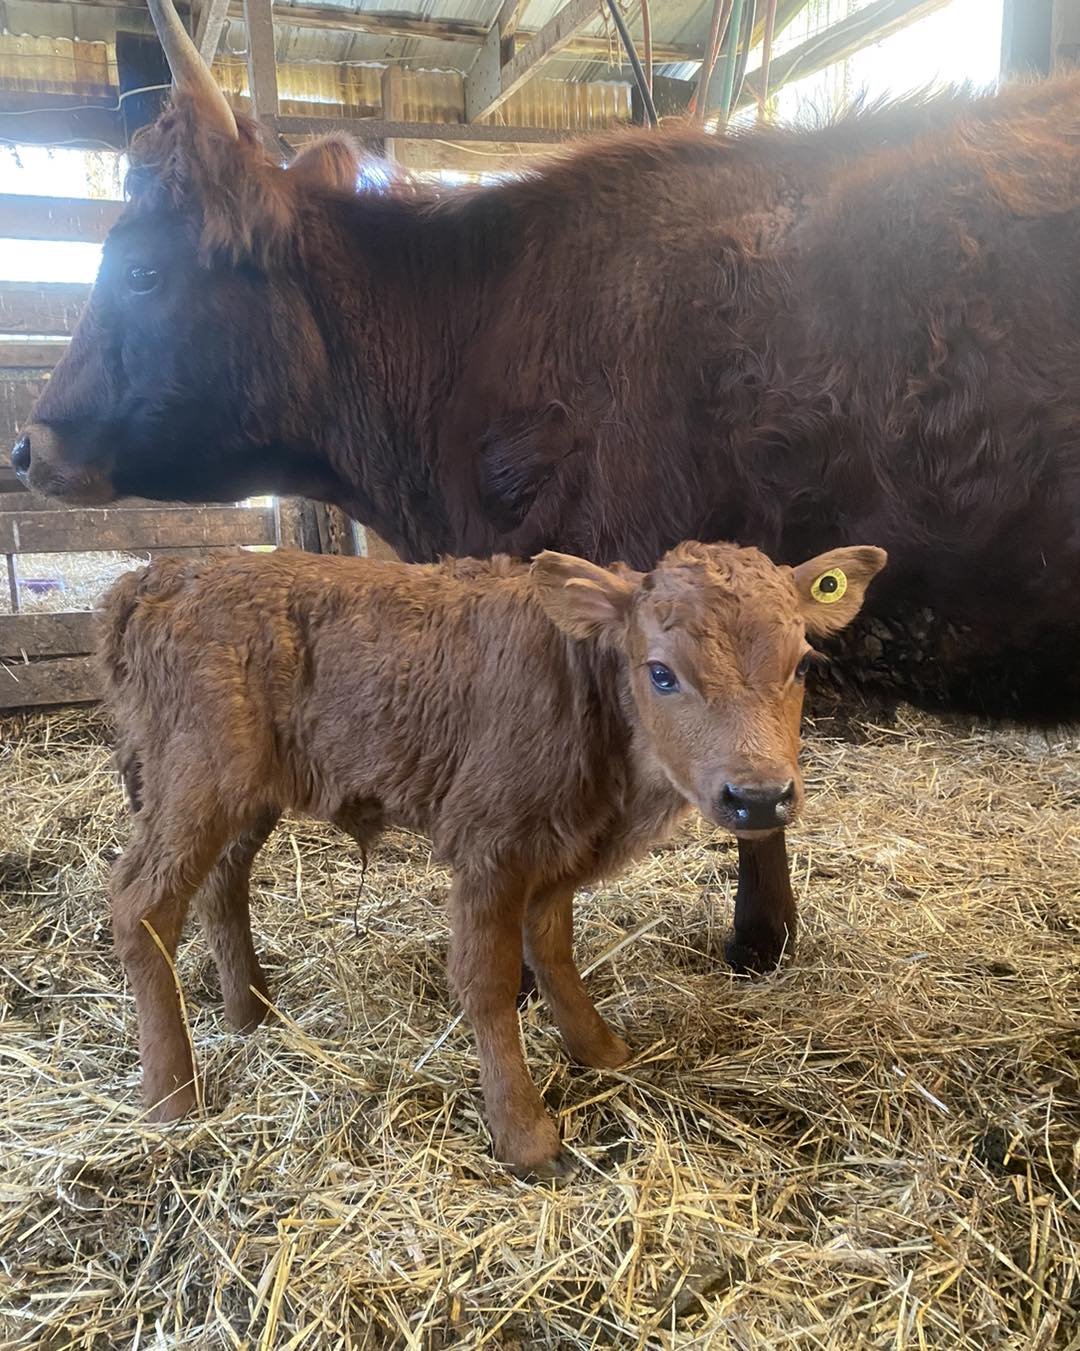 Another girl to add to our herd 🐂
So far 100% girls! 3 more to go&hellip;